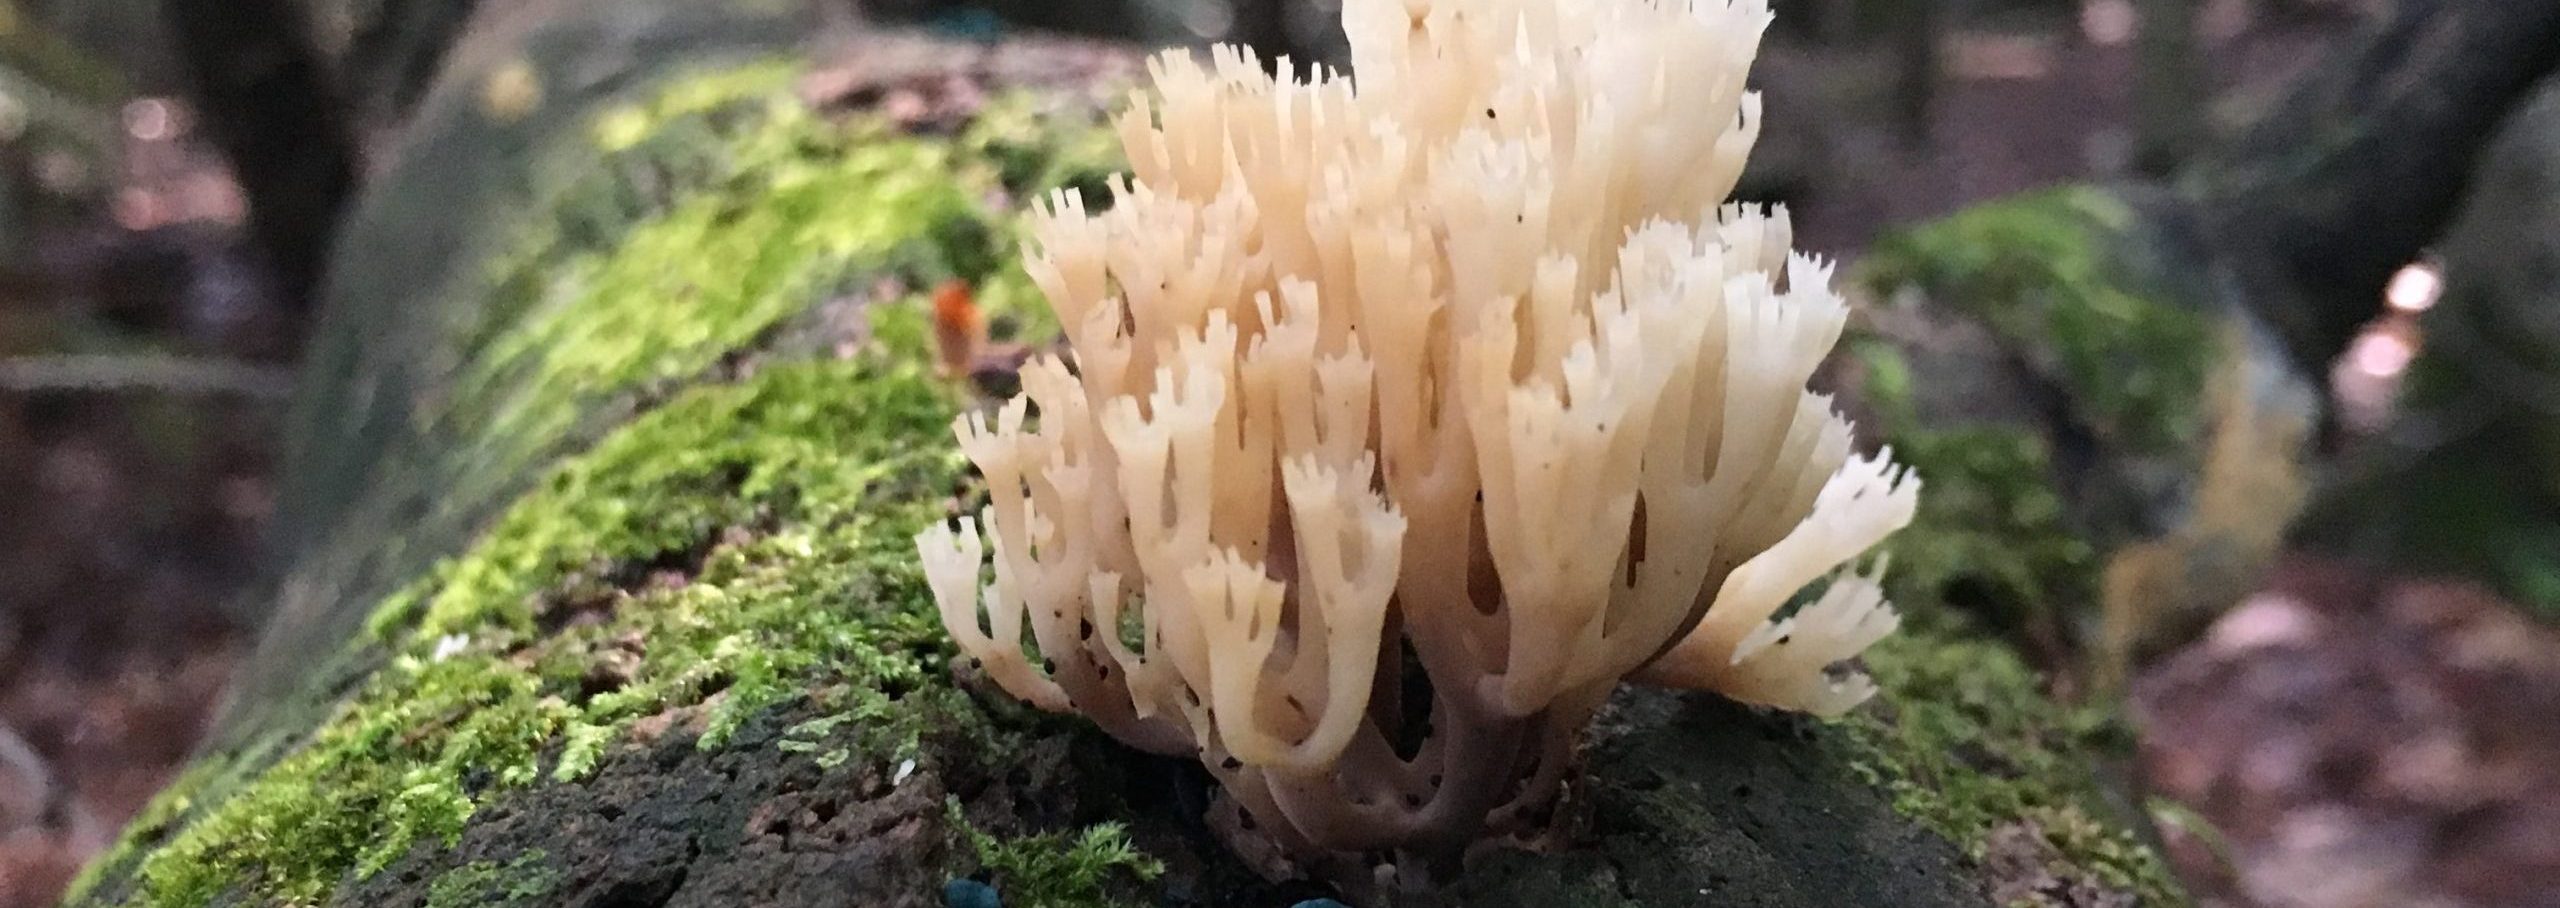 Coral fungus on a log observed on IMA survey